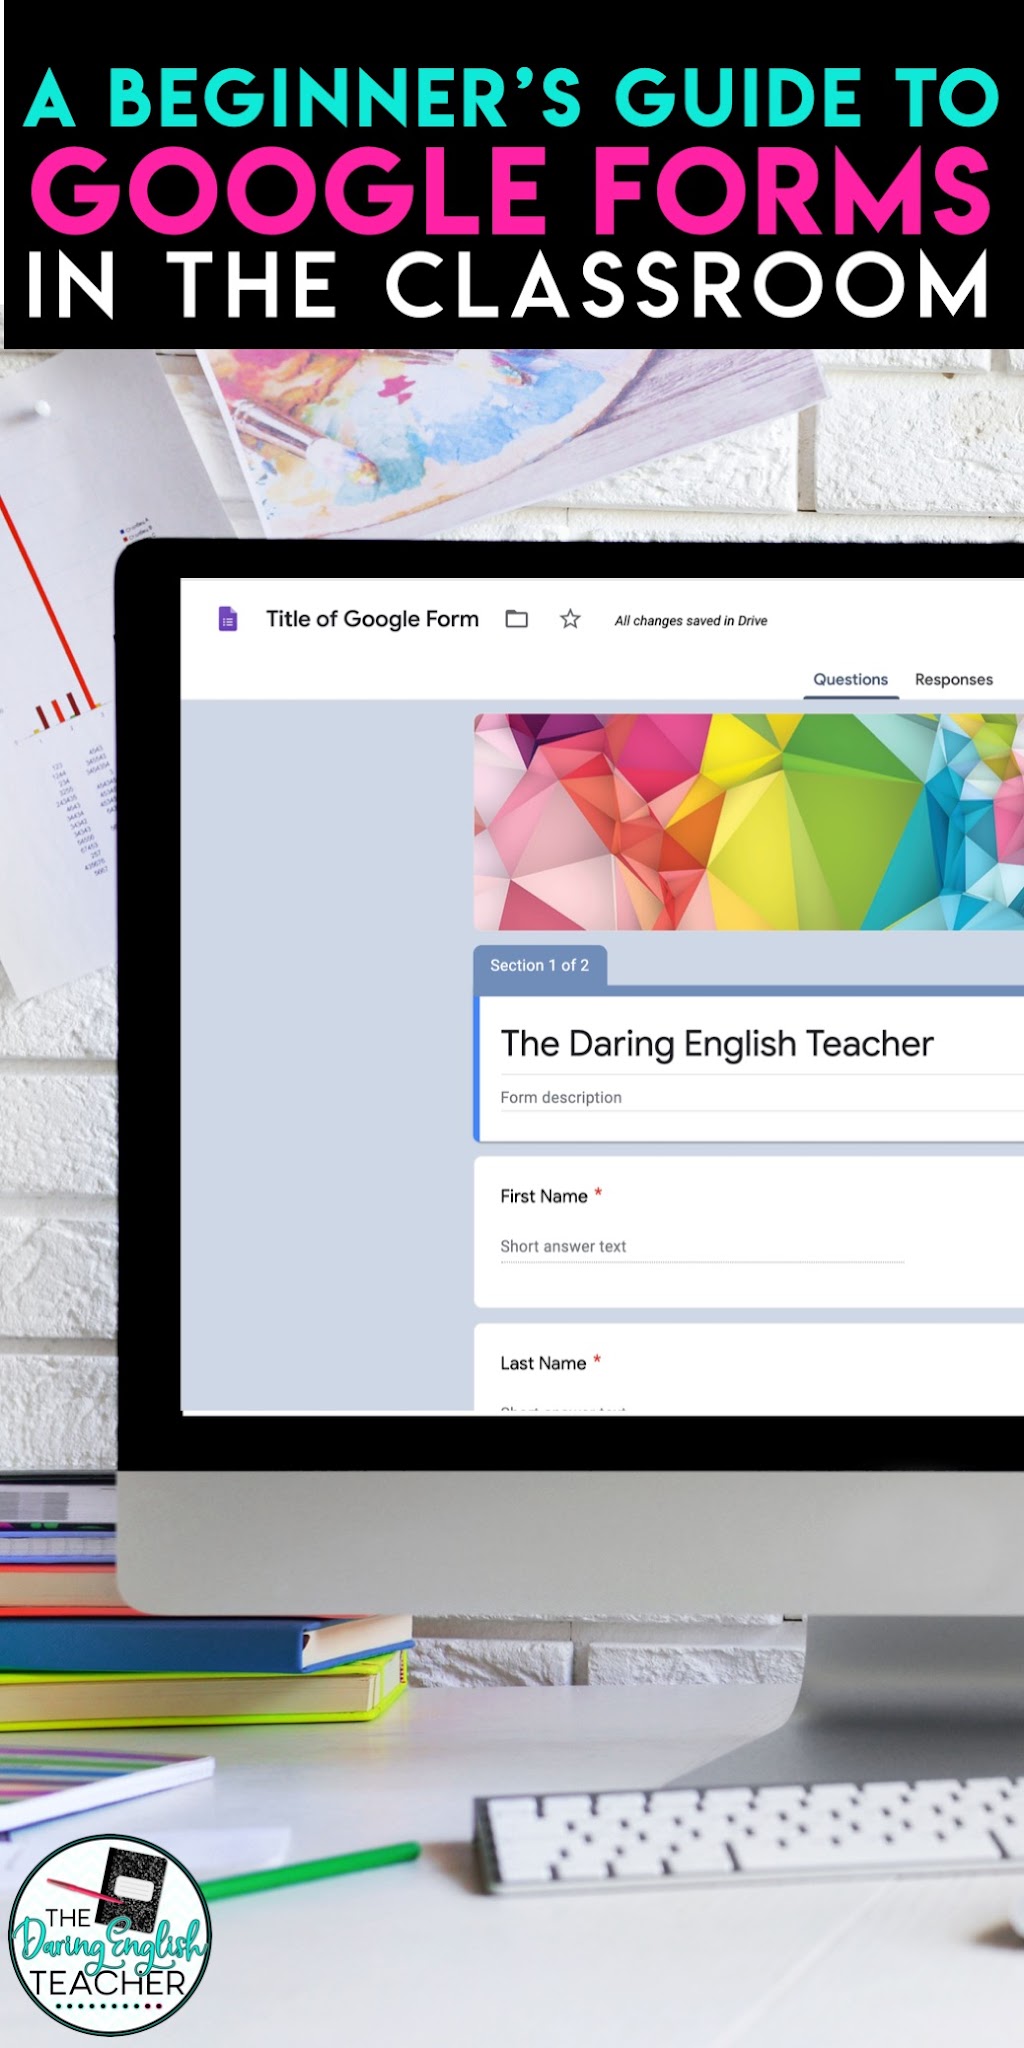 Google Forms in the Classroom: A Beginner's Guide